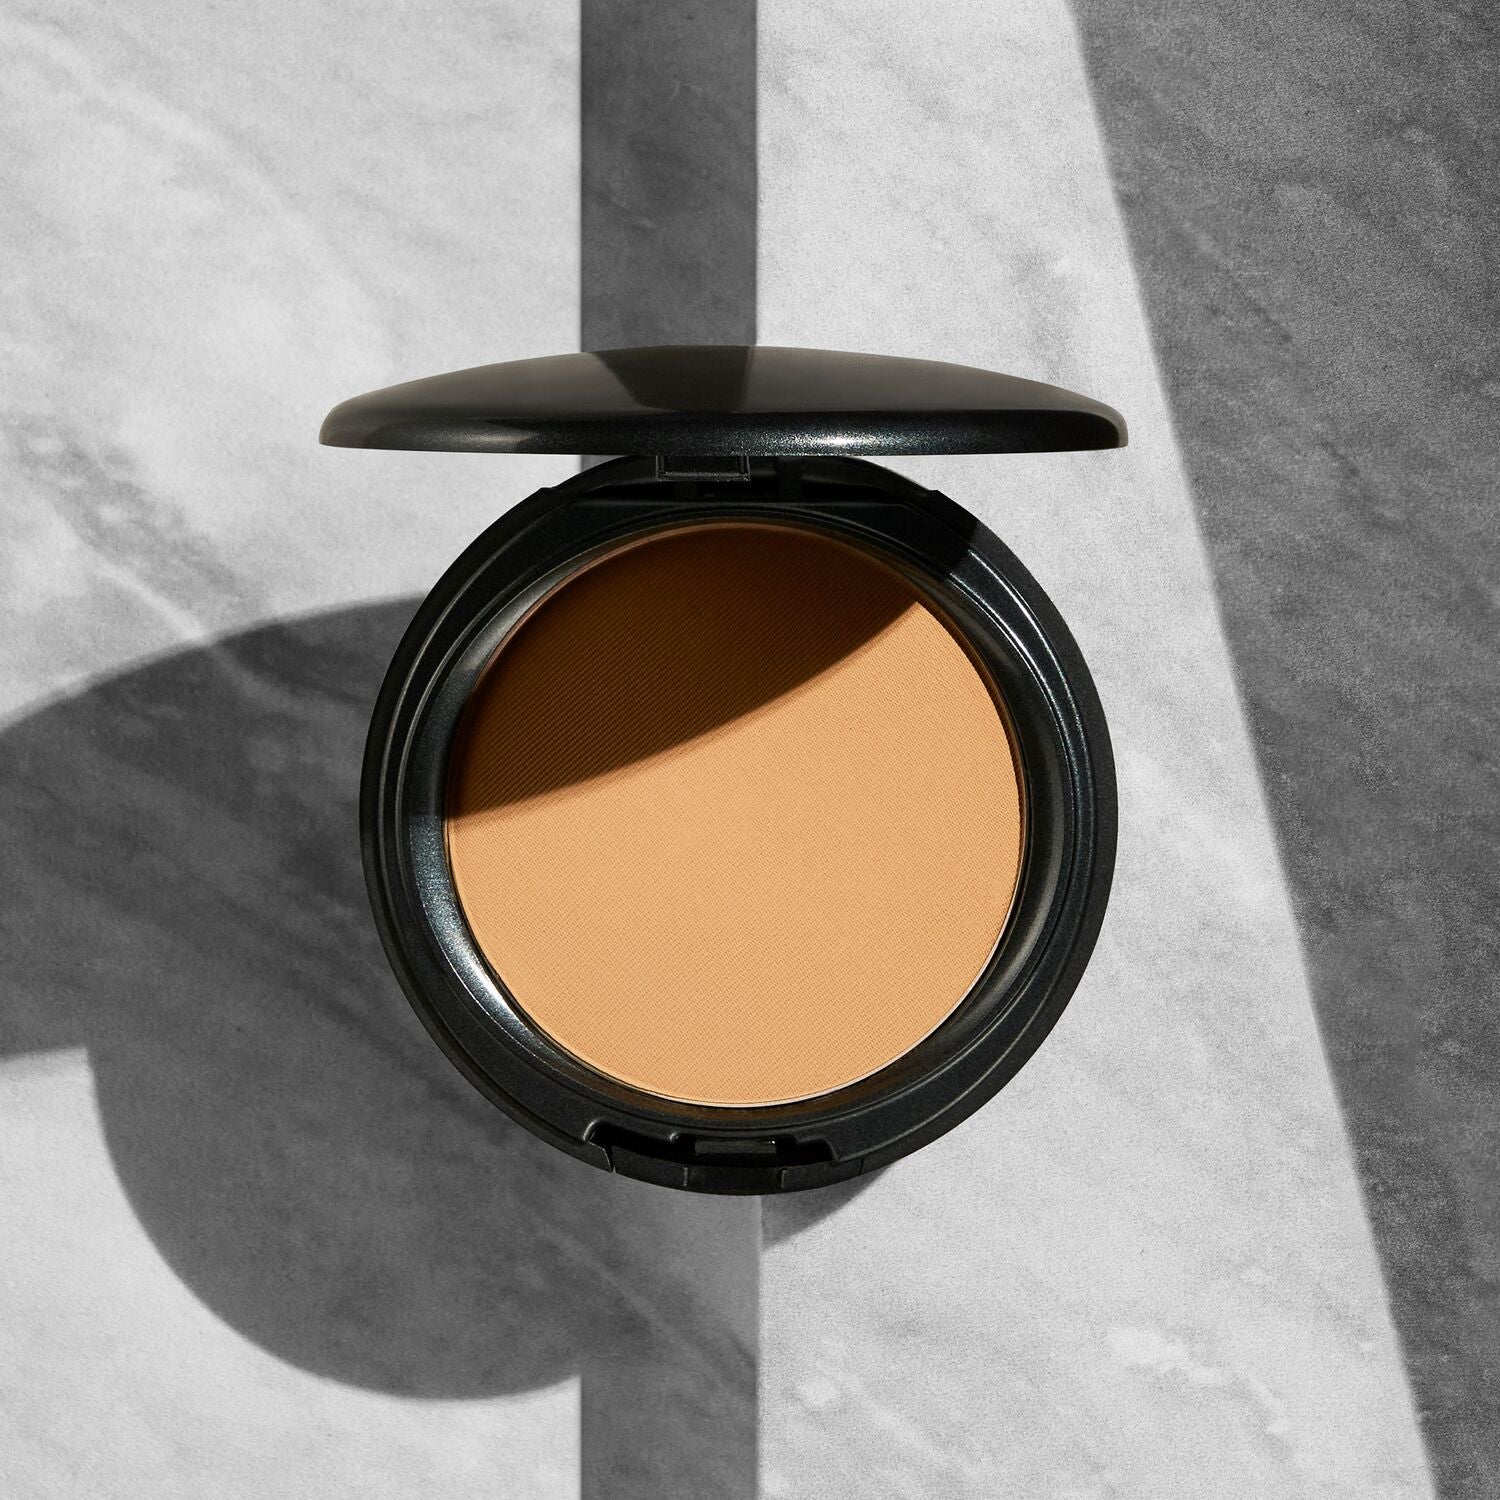 Coverfx Pressed Mineral Foundation in shade M4